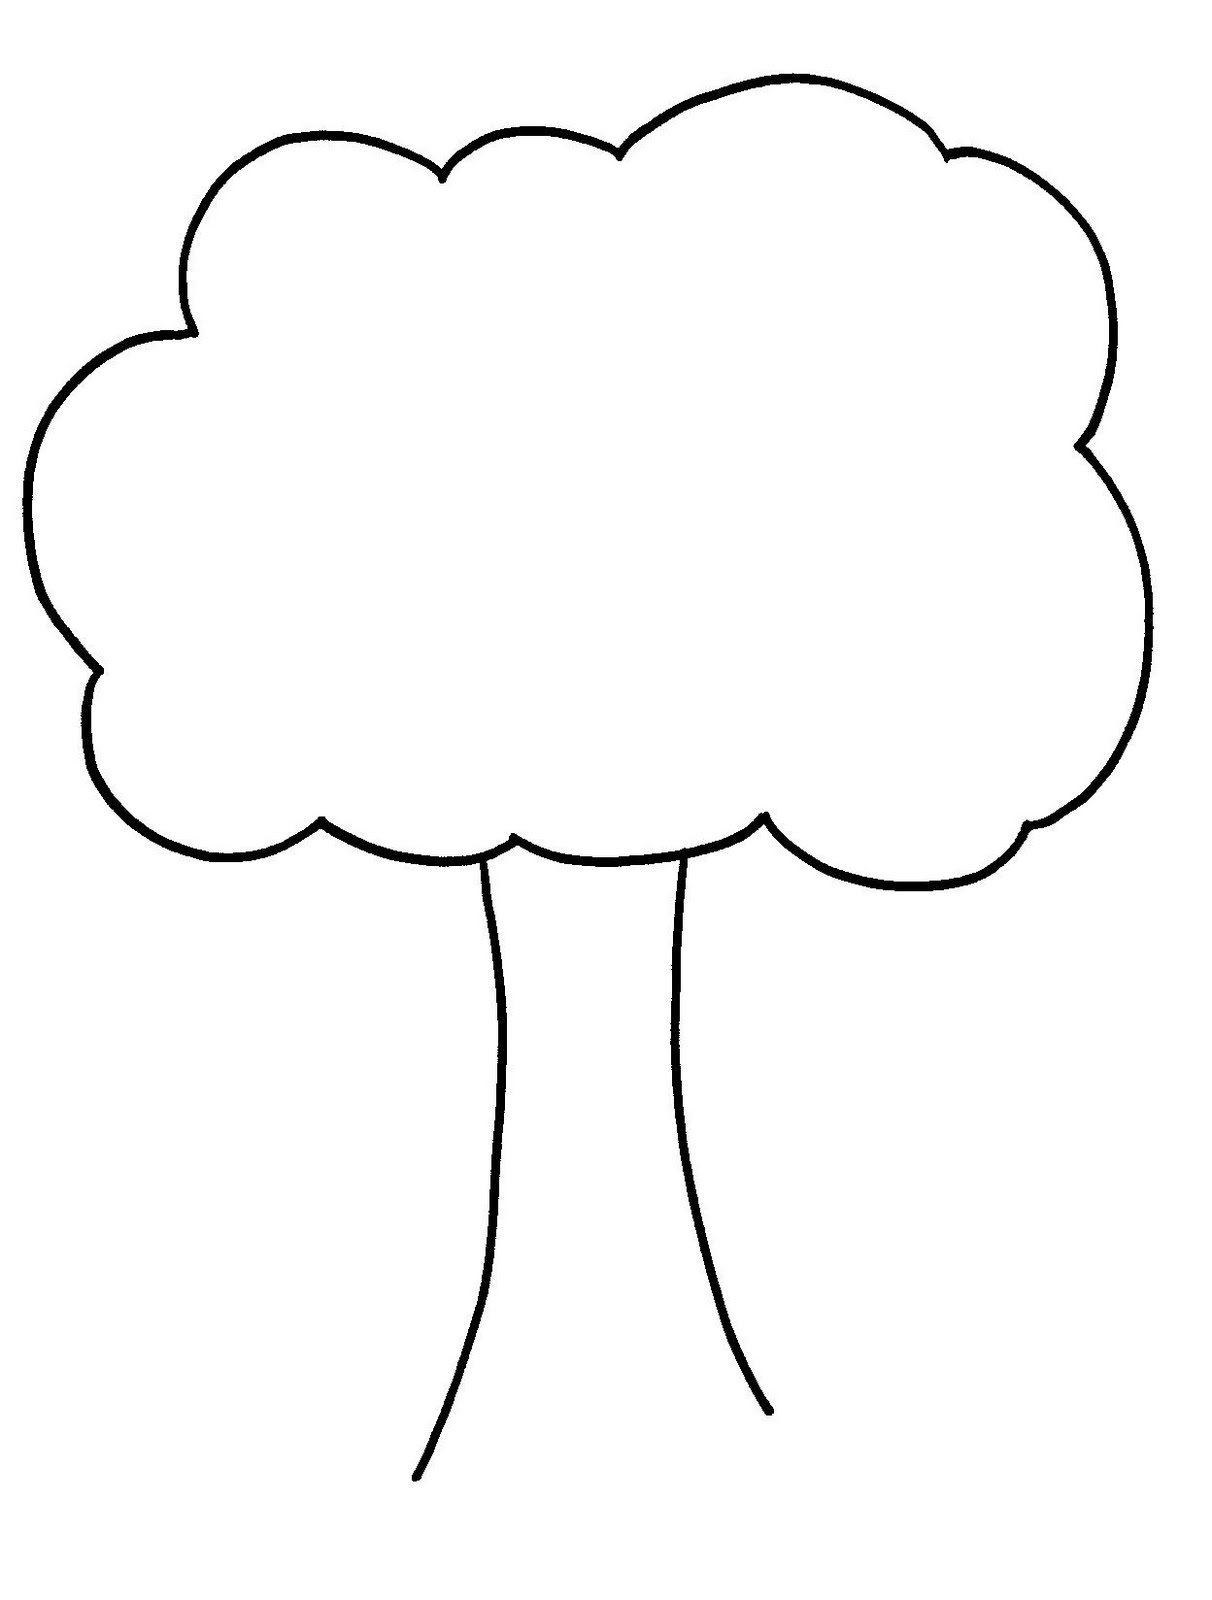 27 Tree Outline Printable Free Cliparts That You Can Download To You